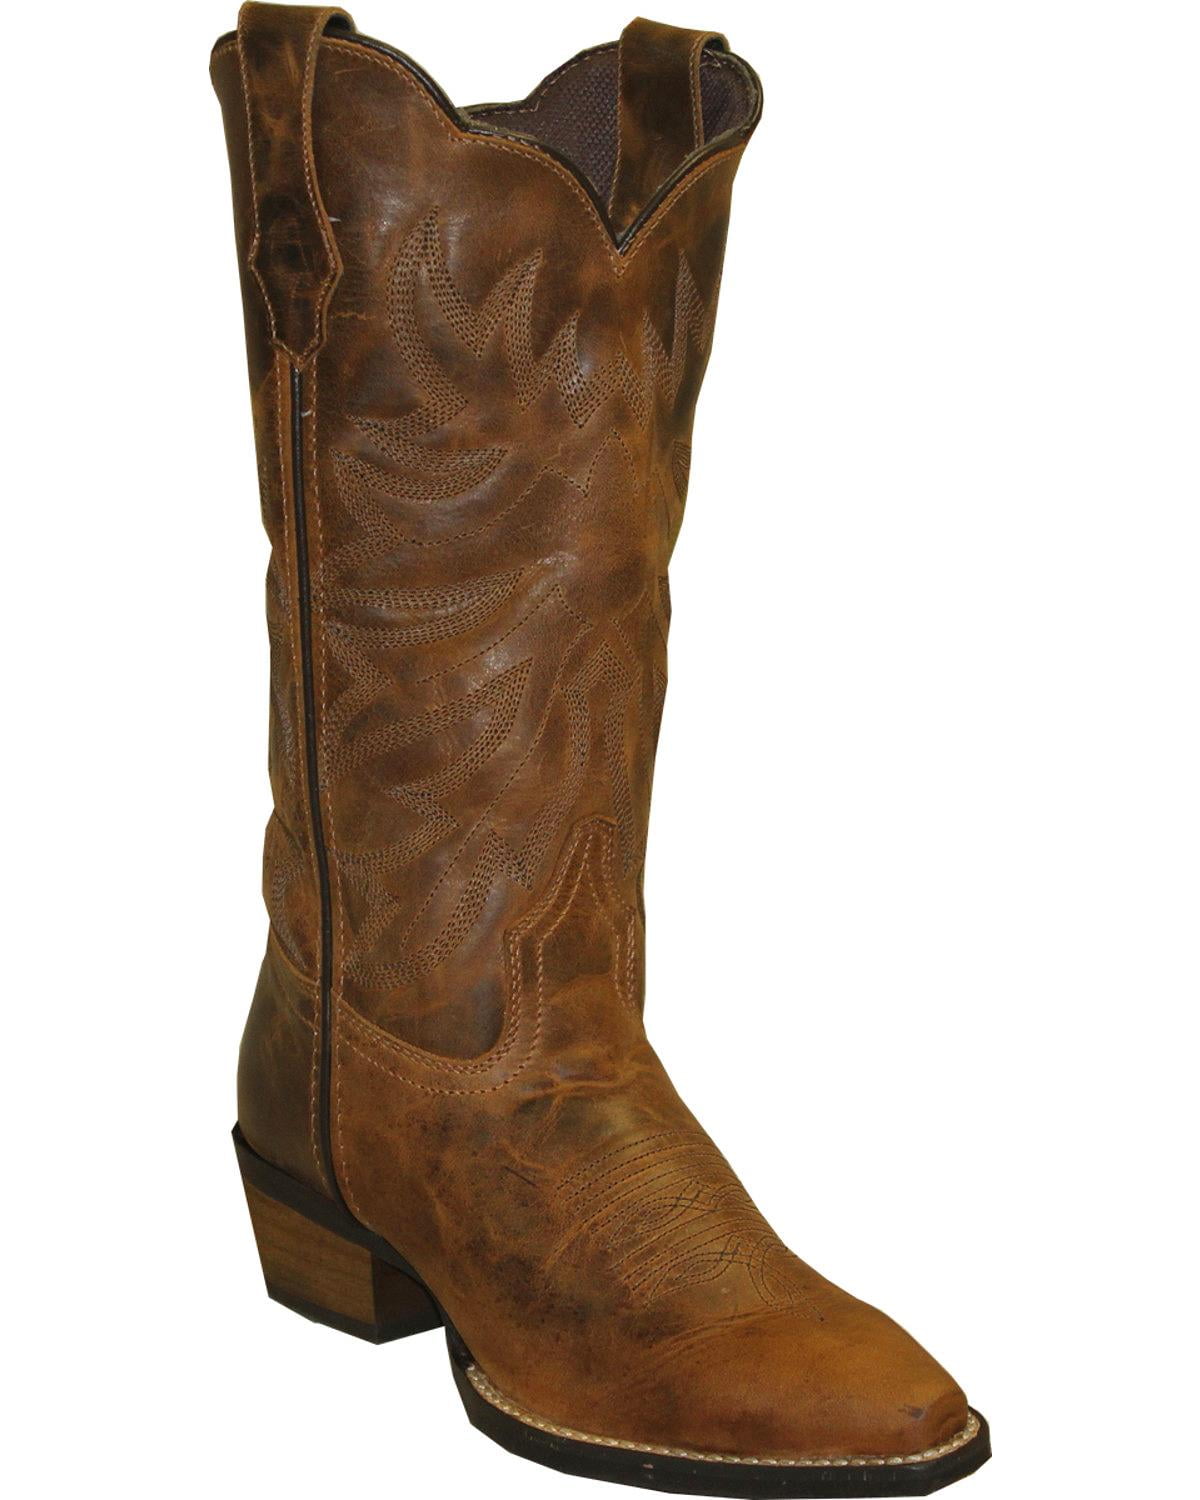 G1201 CORRAL Women's Cognac Antique Saddle Cowgirl Boot Snip Toe 